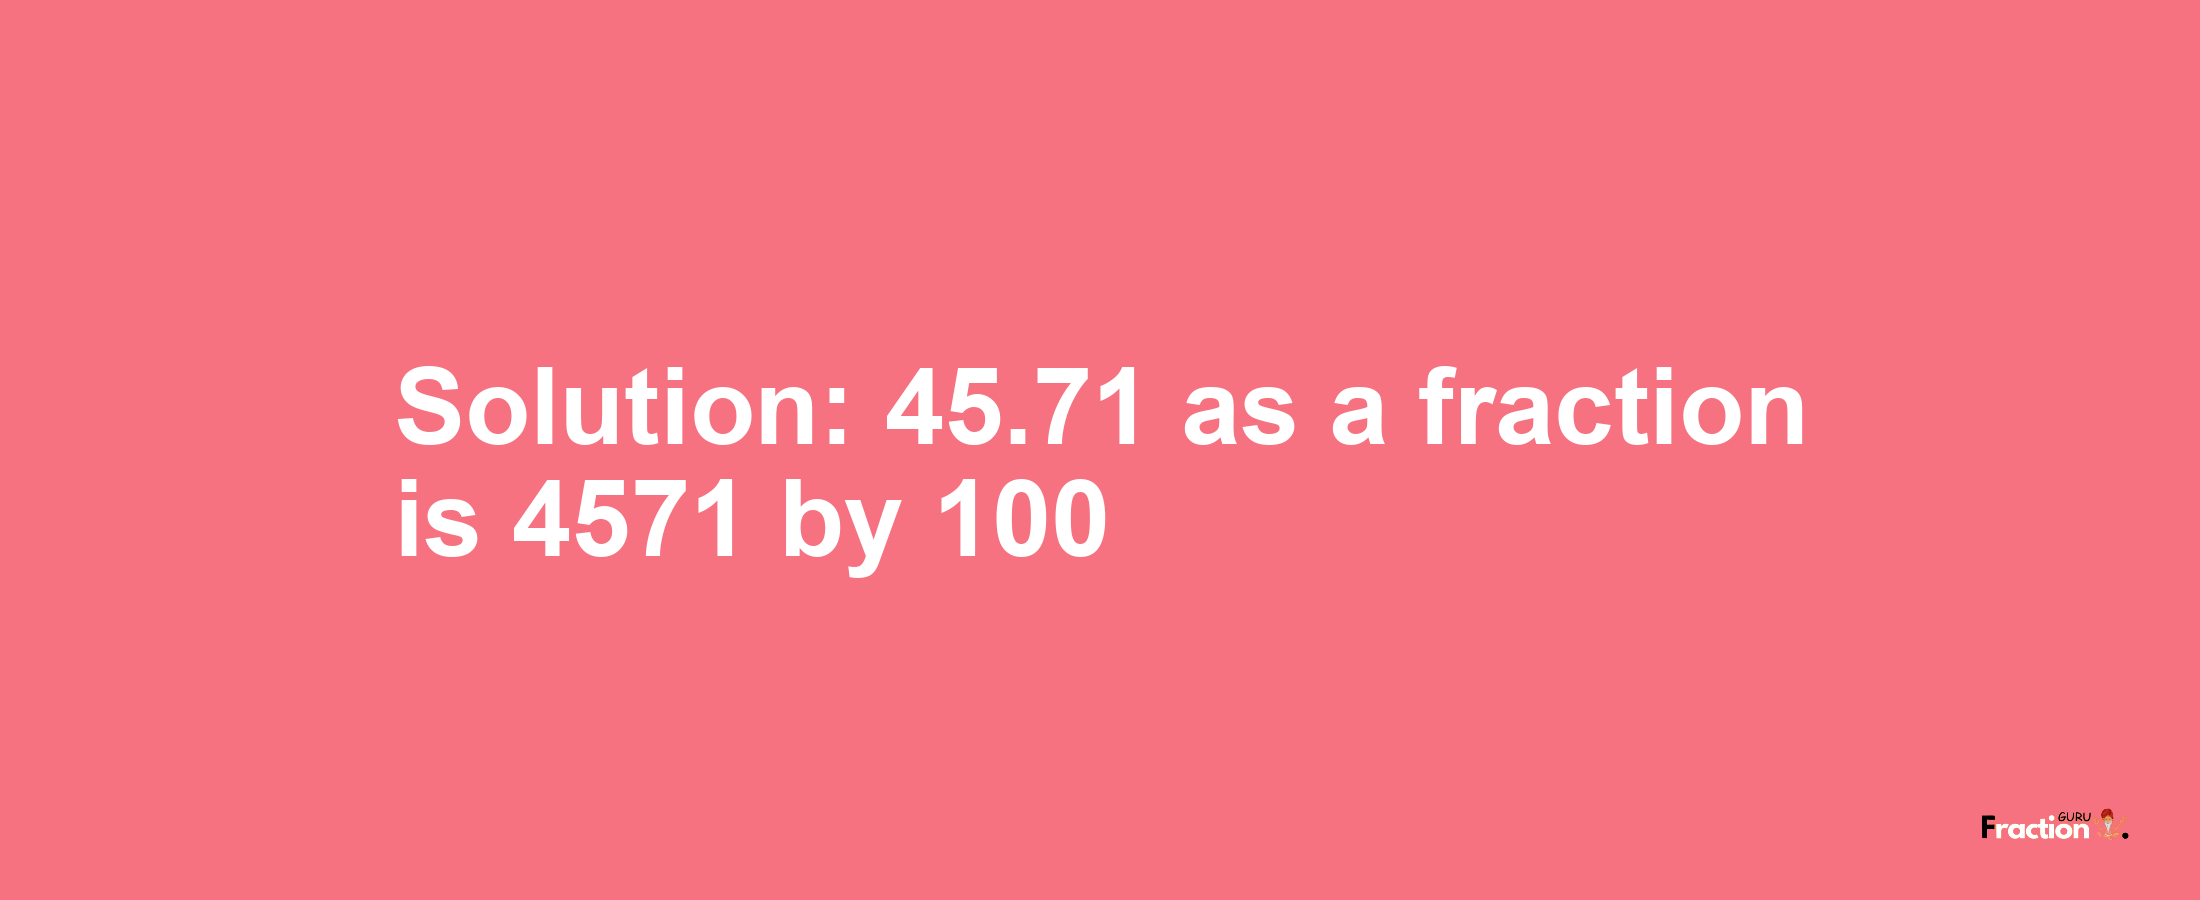 Solution:45.71 as a fraction is 4571/100